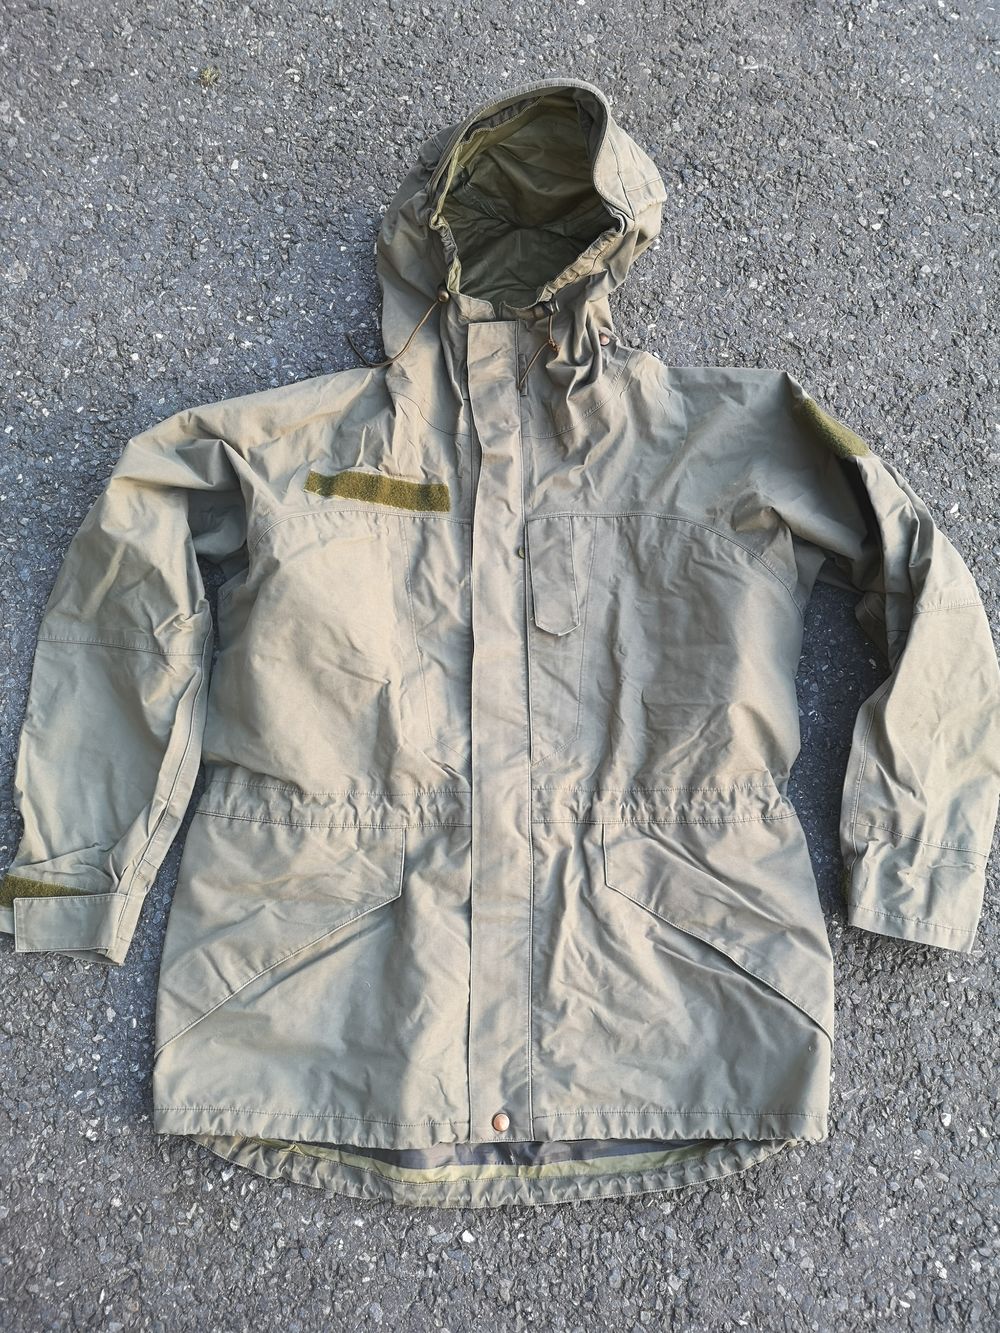 Austrian Army Gore-Tex Over-Jacket Alpine – Grade Forces Uniform And ...